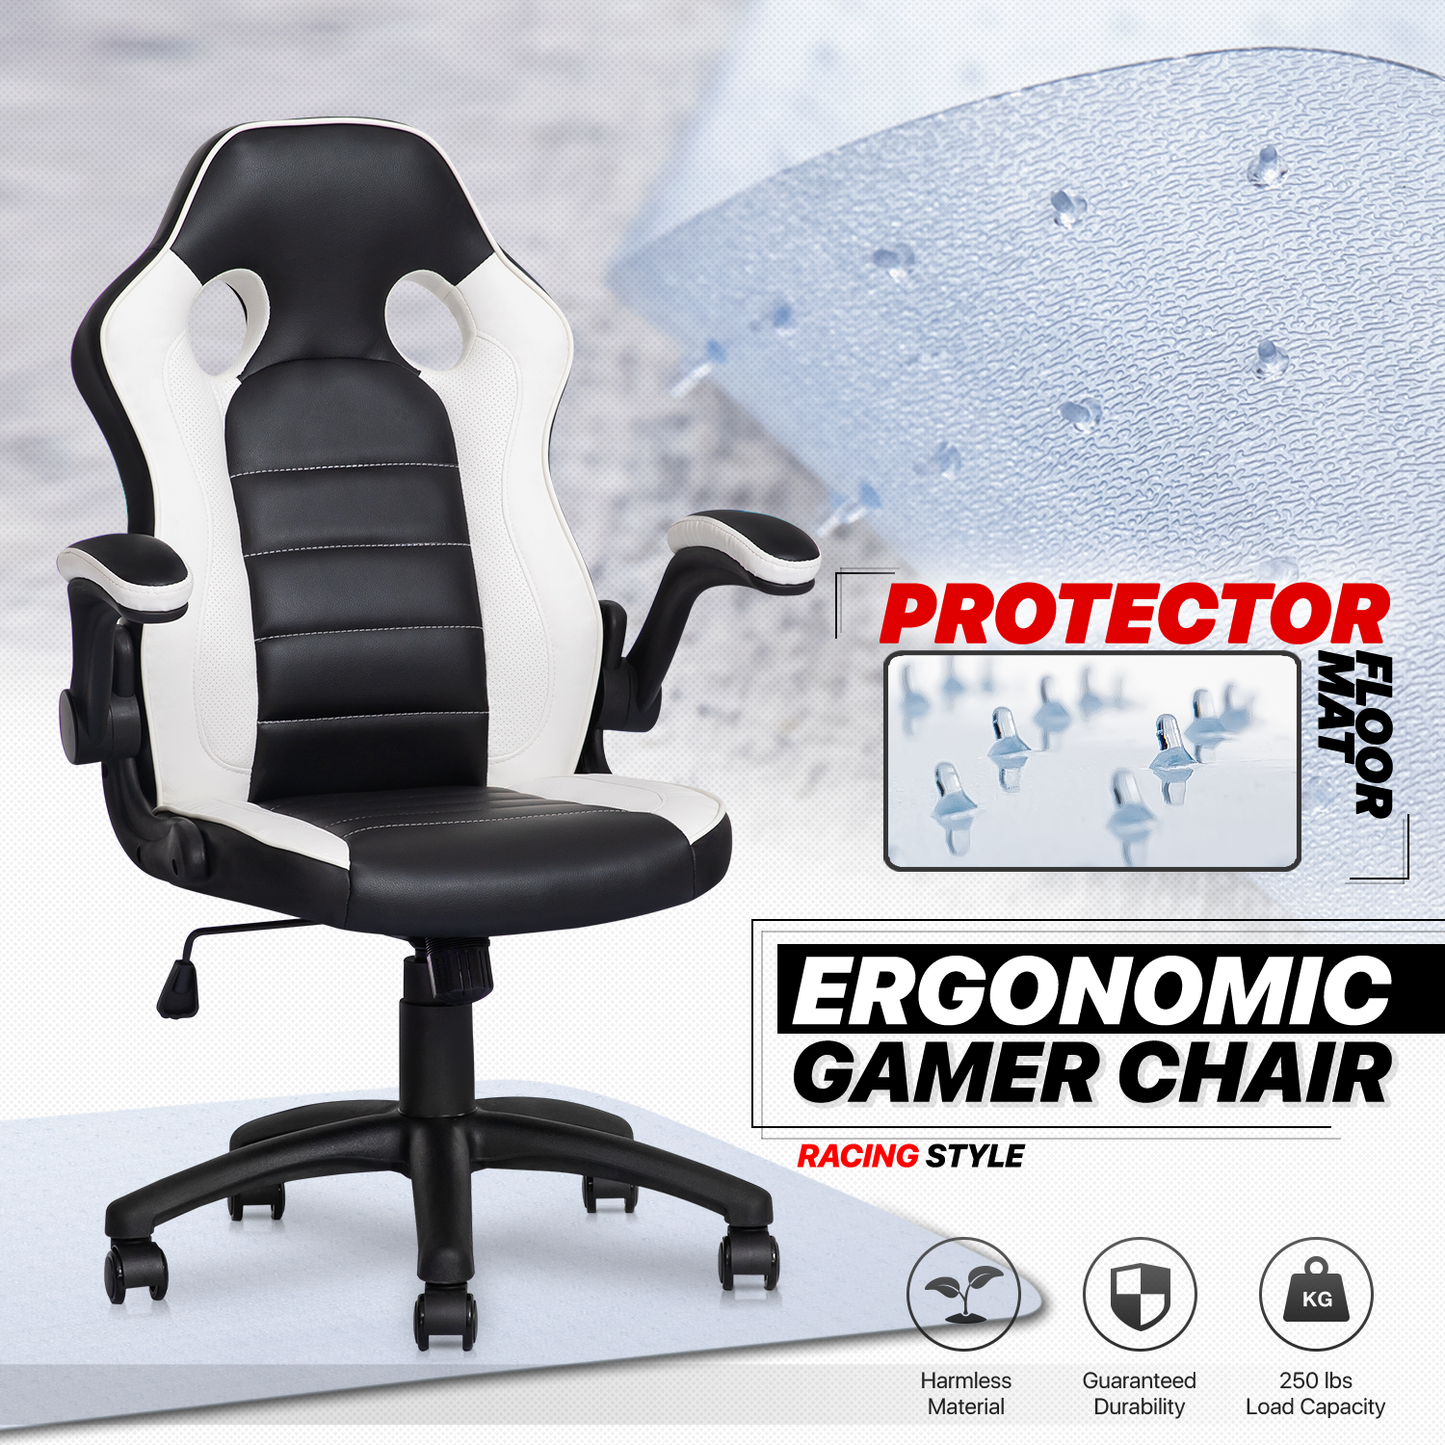 Two-Tone Racing Game Chair - 29" x 47" Studded Mat Set